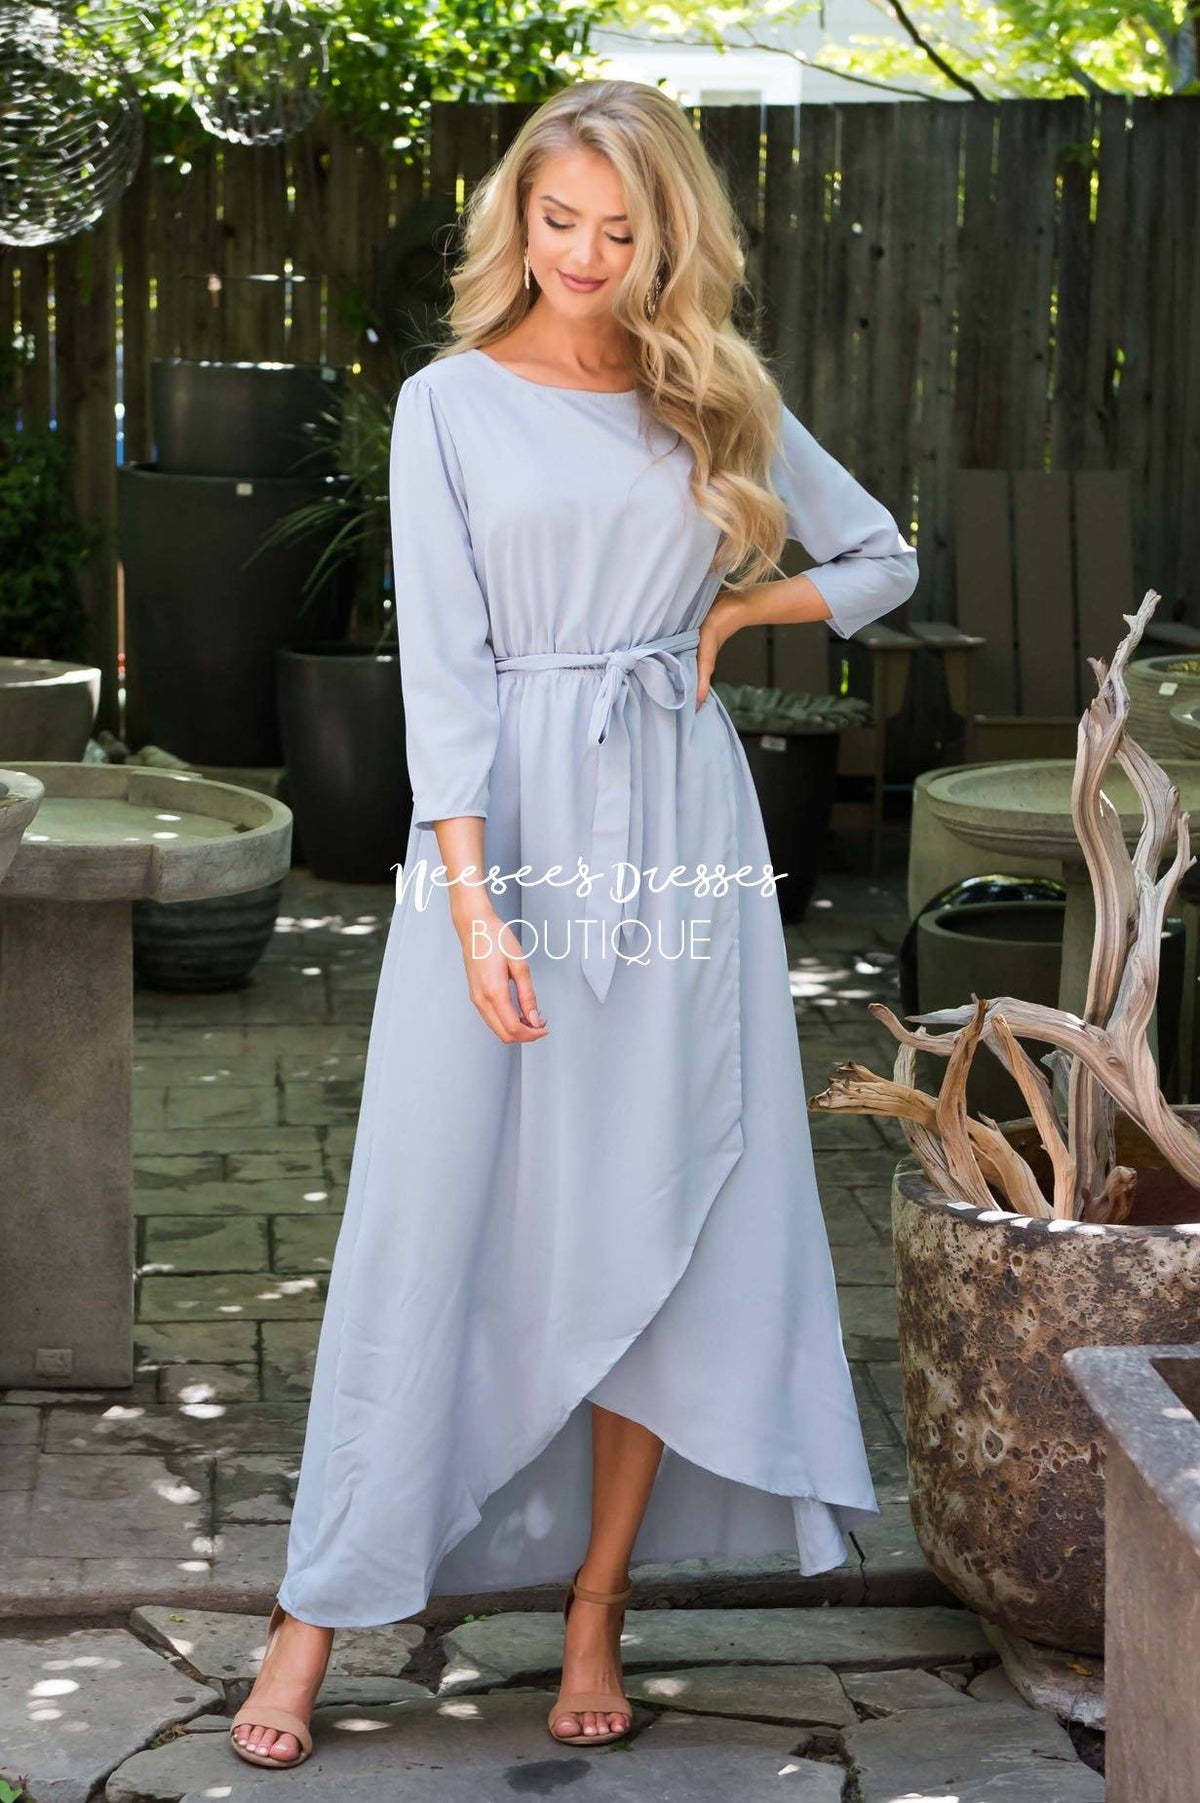 Dusty blue Modest Church Dress | Best and Affordable Modest Boutique ...